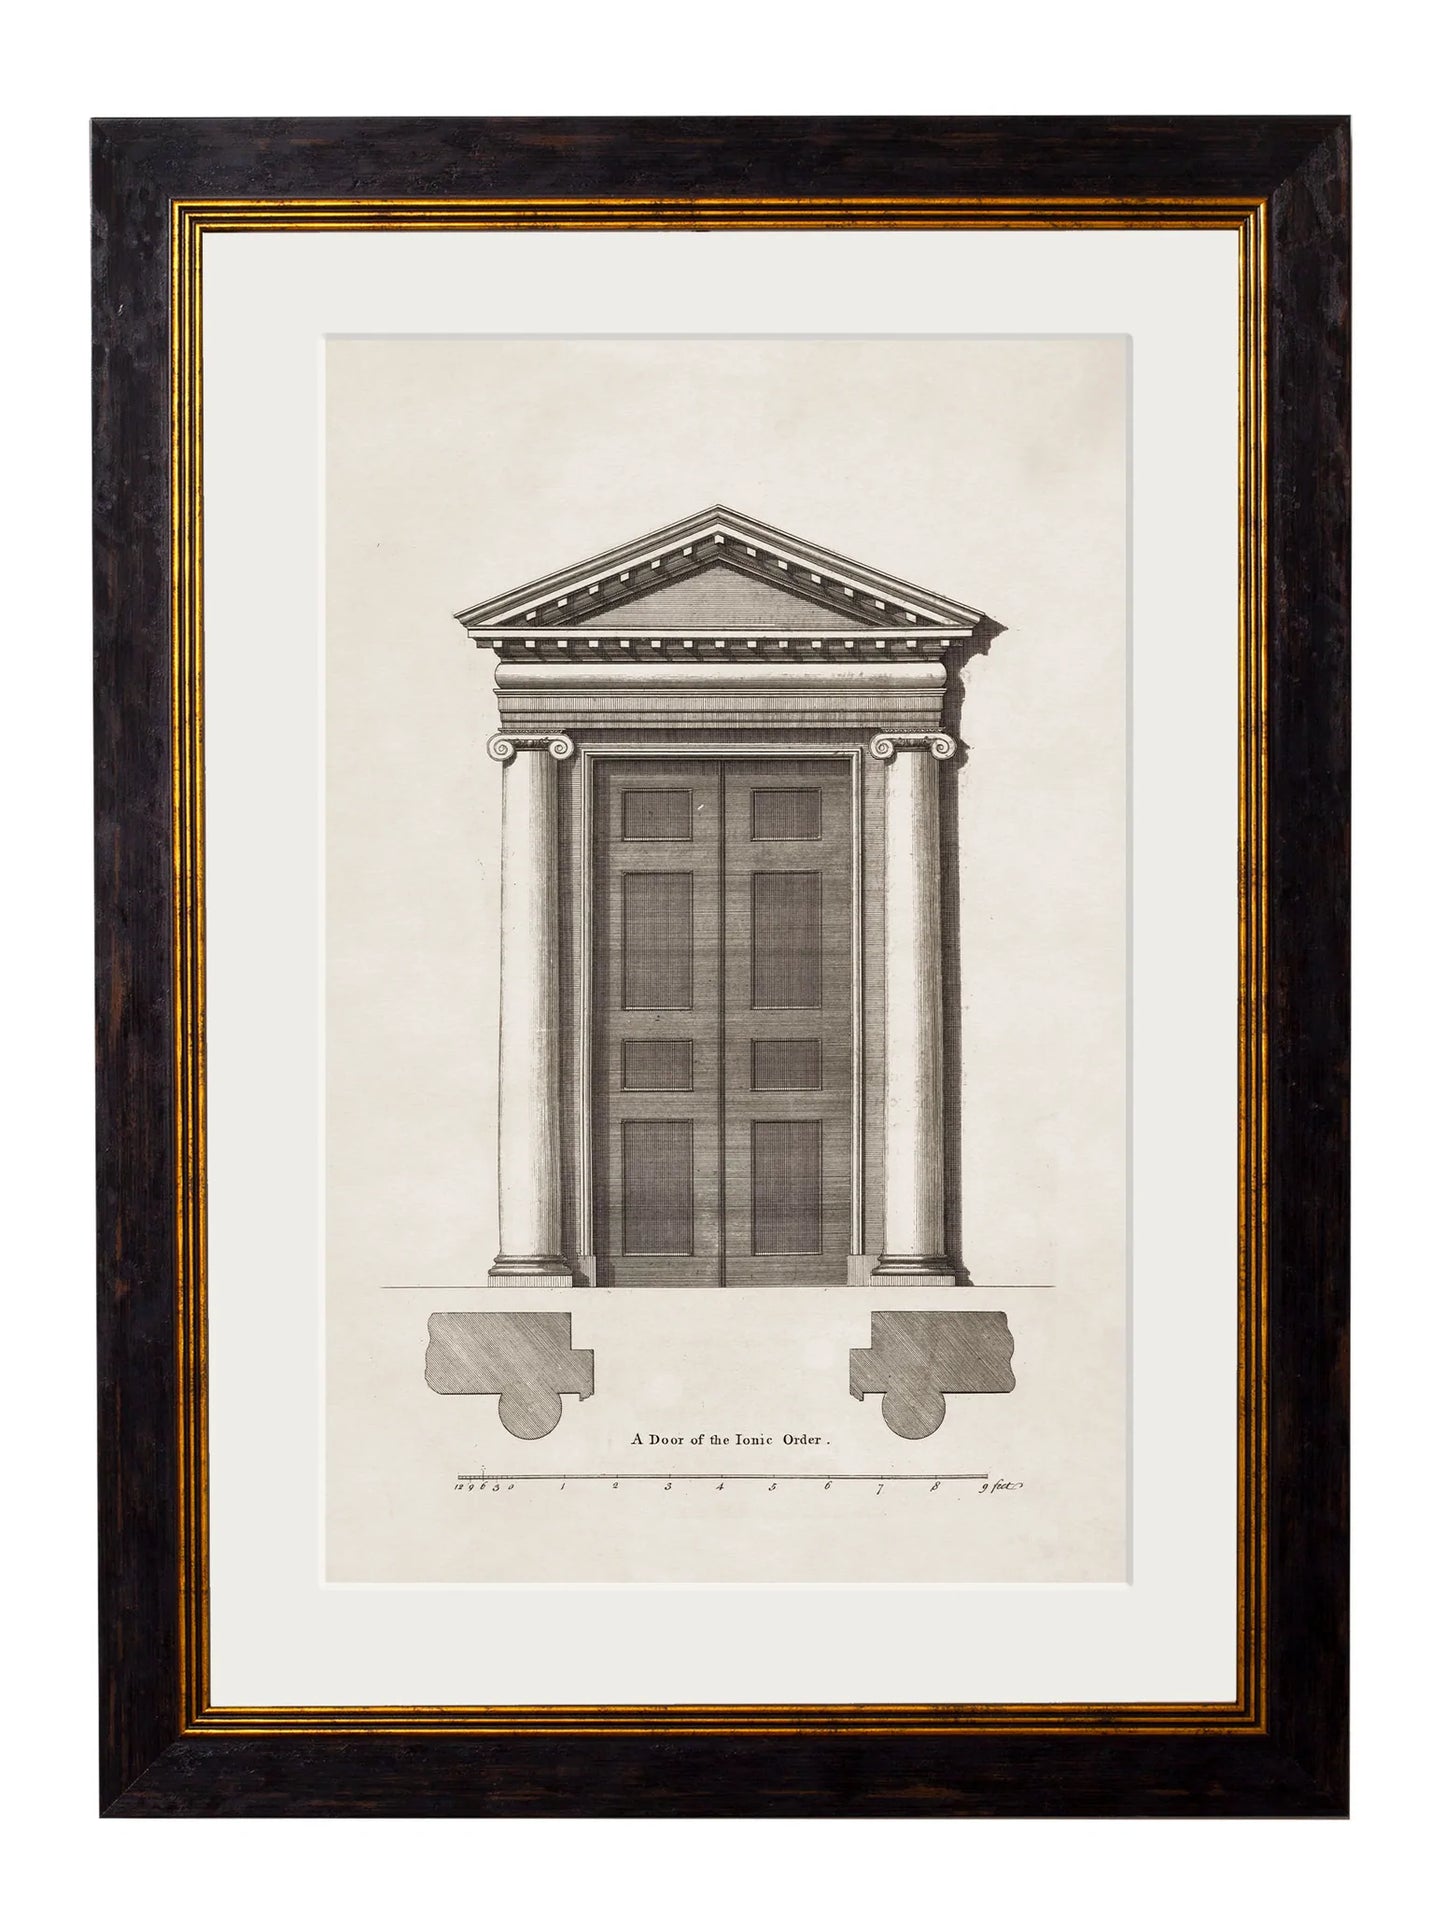 Framed Architectural Study of 18th Century Doors